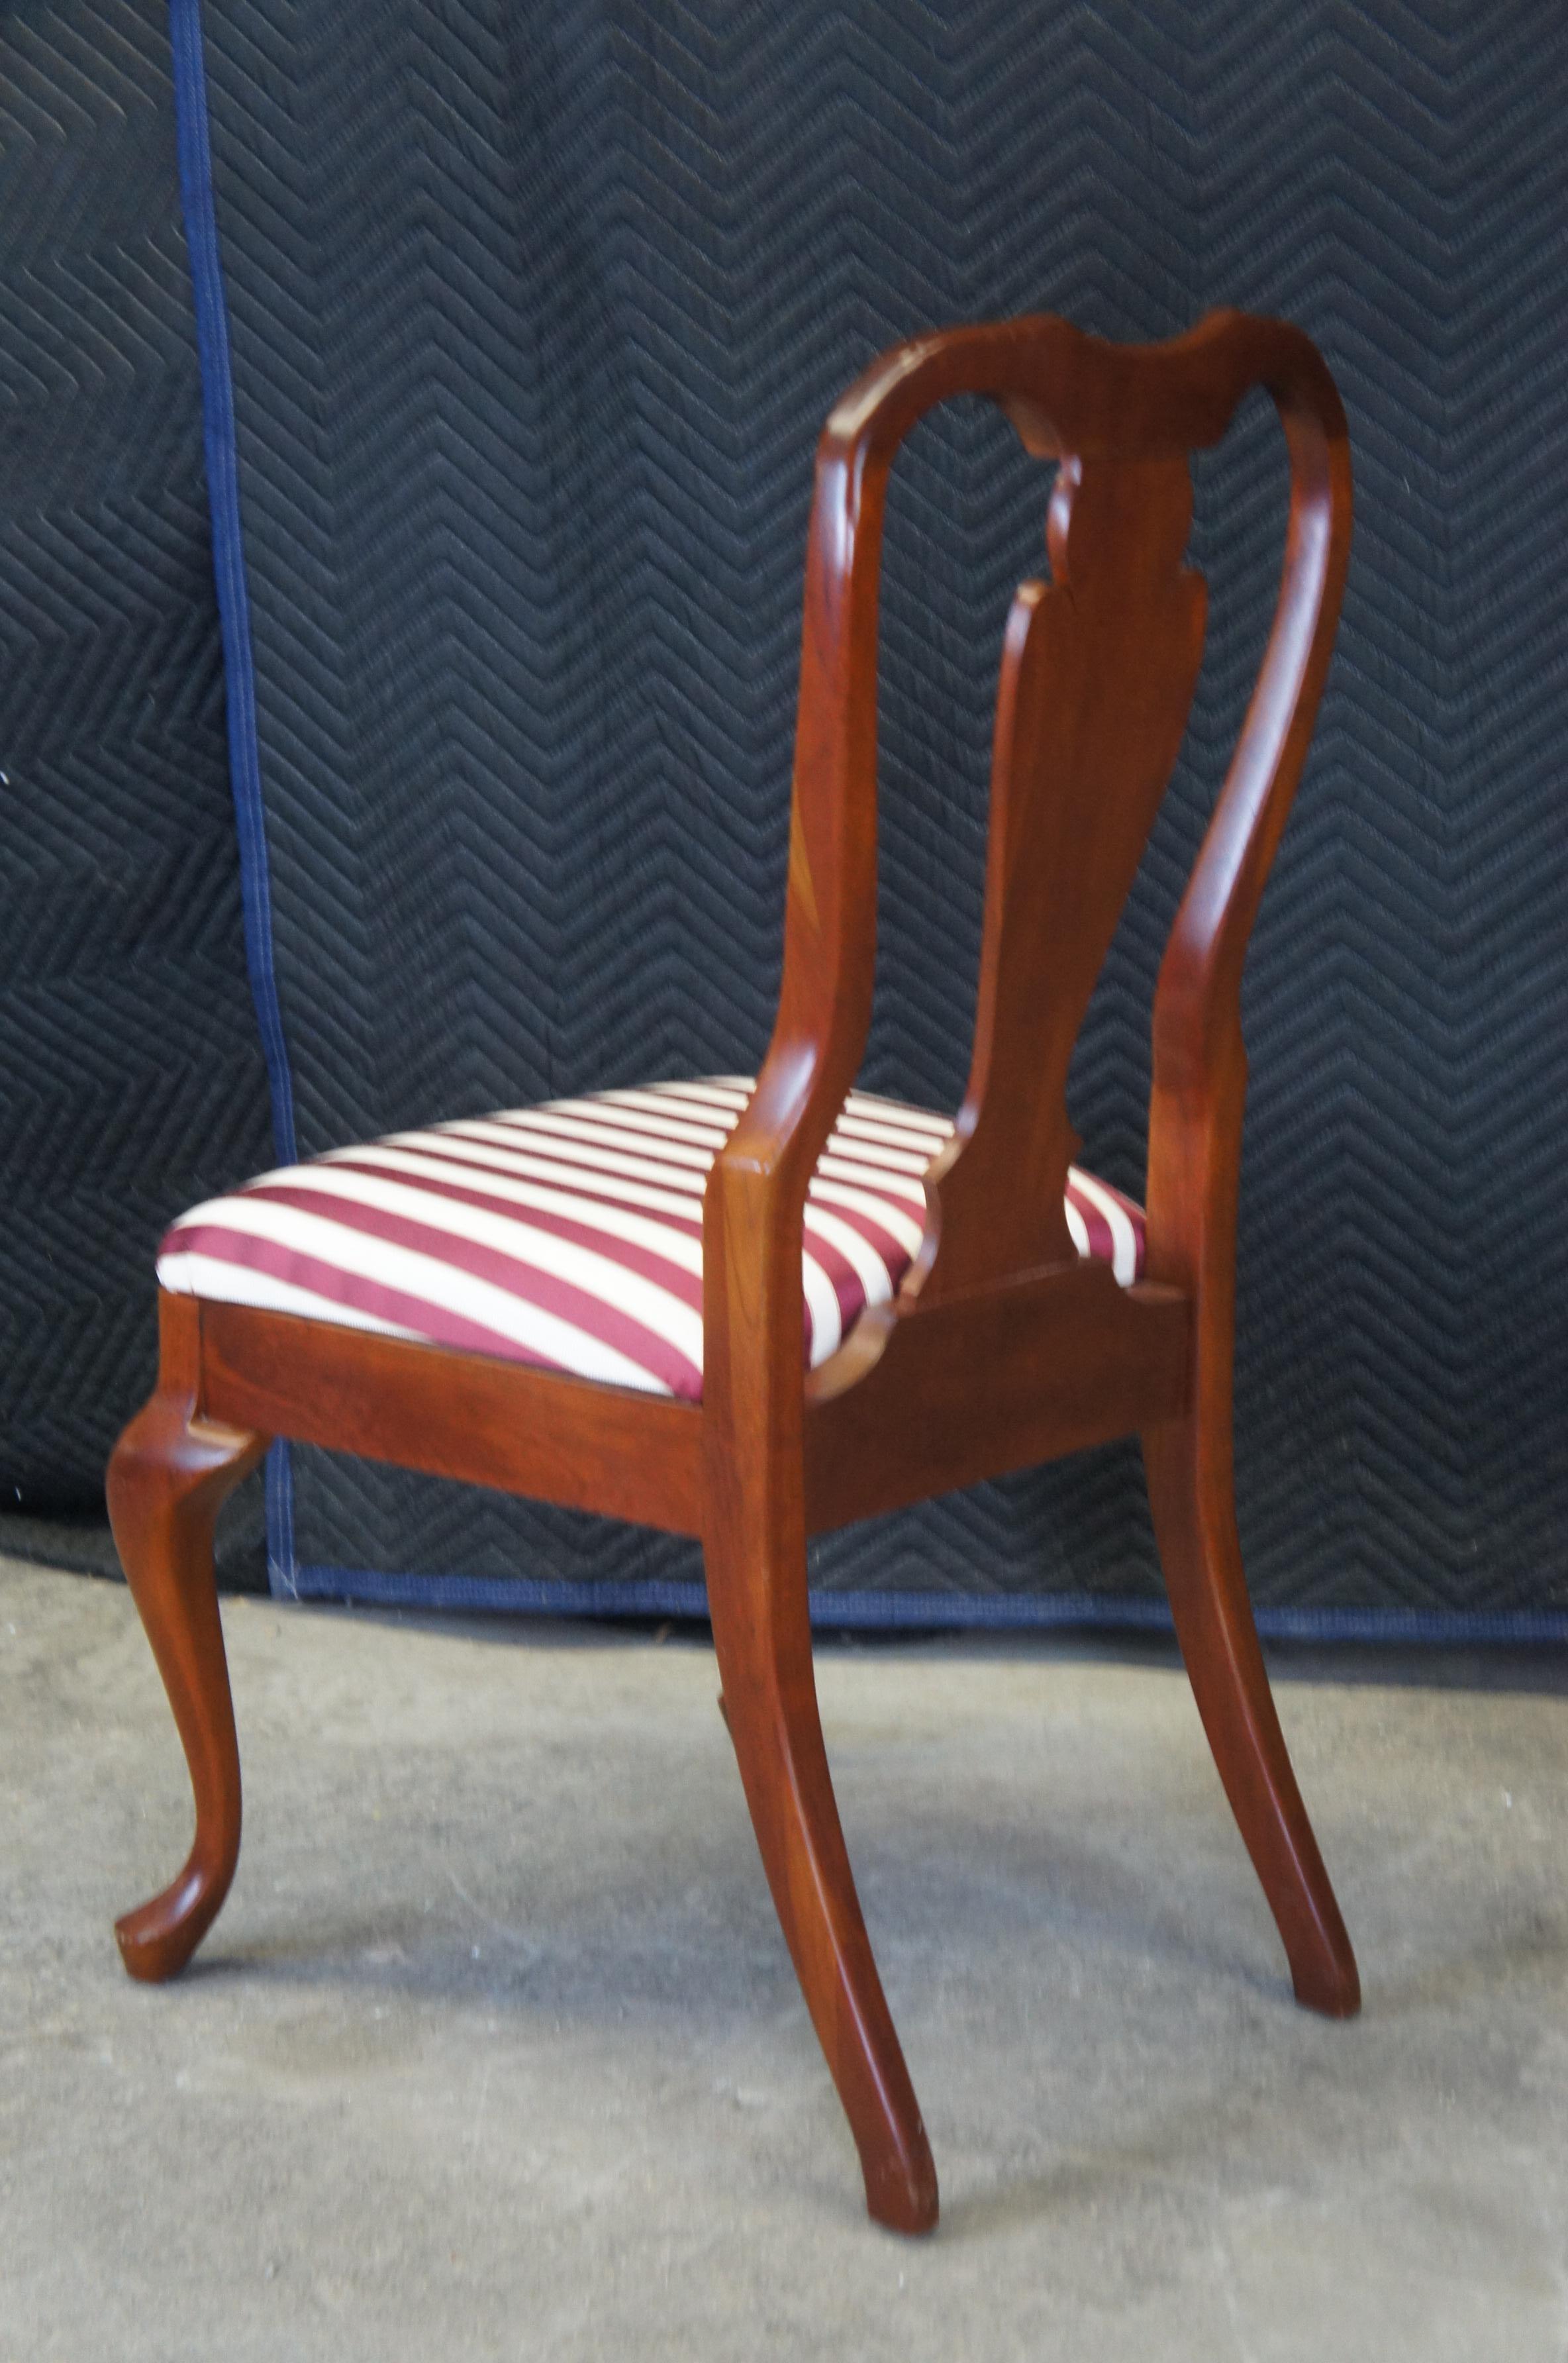 6 Vintage Cresent Queen Anne Style Cherry Dining Chairs Striped Upholstered Seat 6